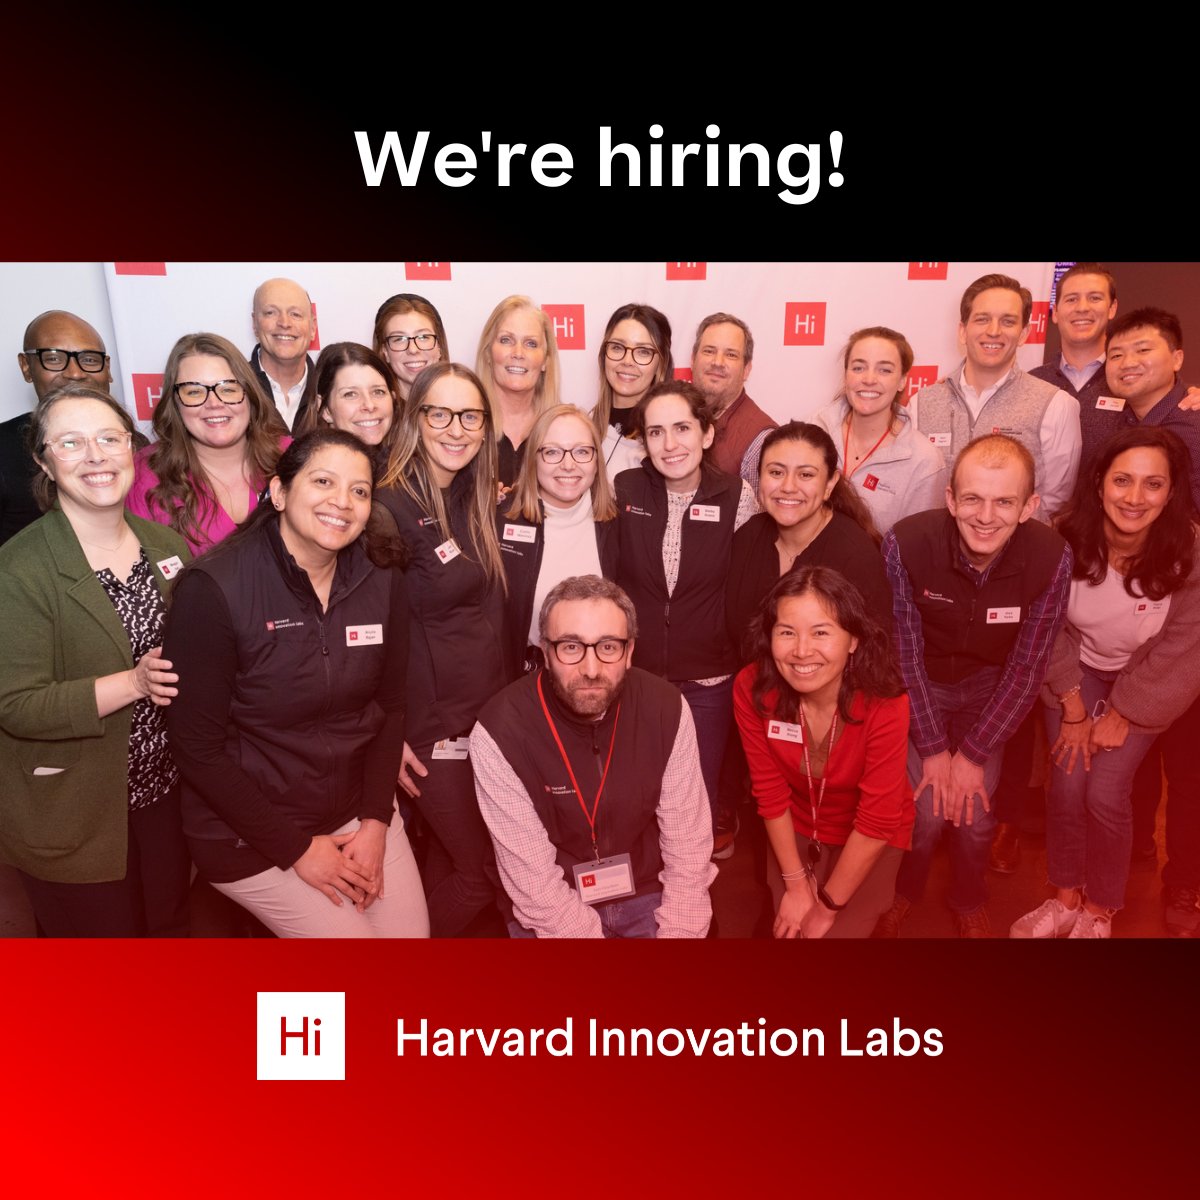 📣 Looking to kickstart your communications career in the new year? Know someone awesome who is? We're hiring a Marketing Communications Coordinator to help spread the word about i-lab offerings and success stories to the Harvard community and beyond! bit.ly/3H0vi4S